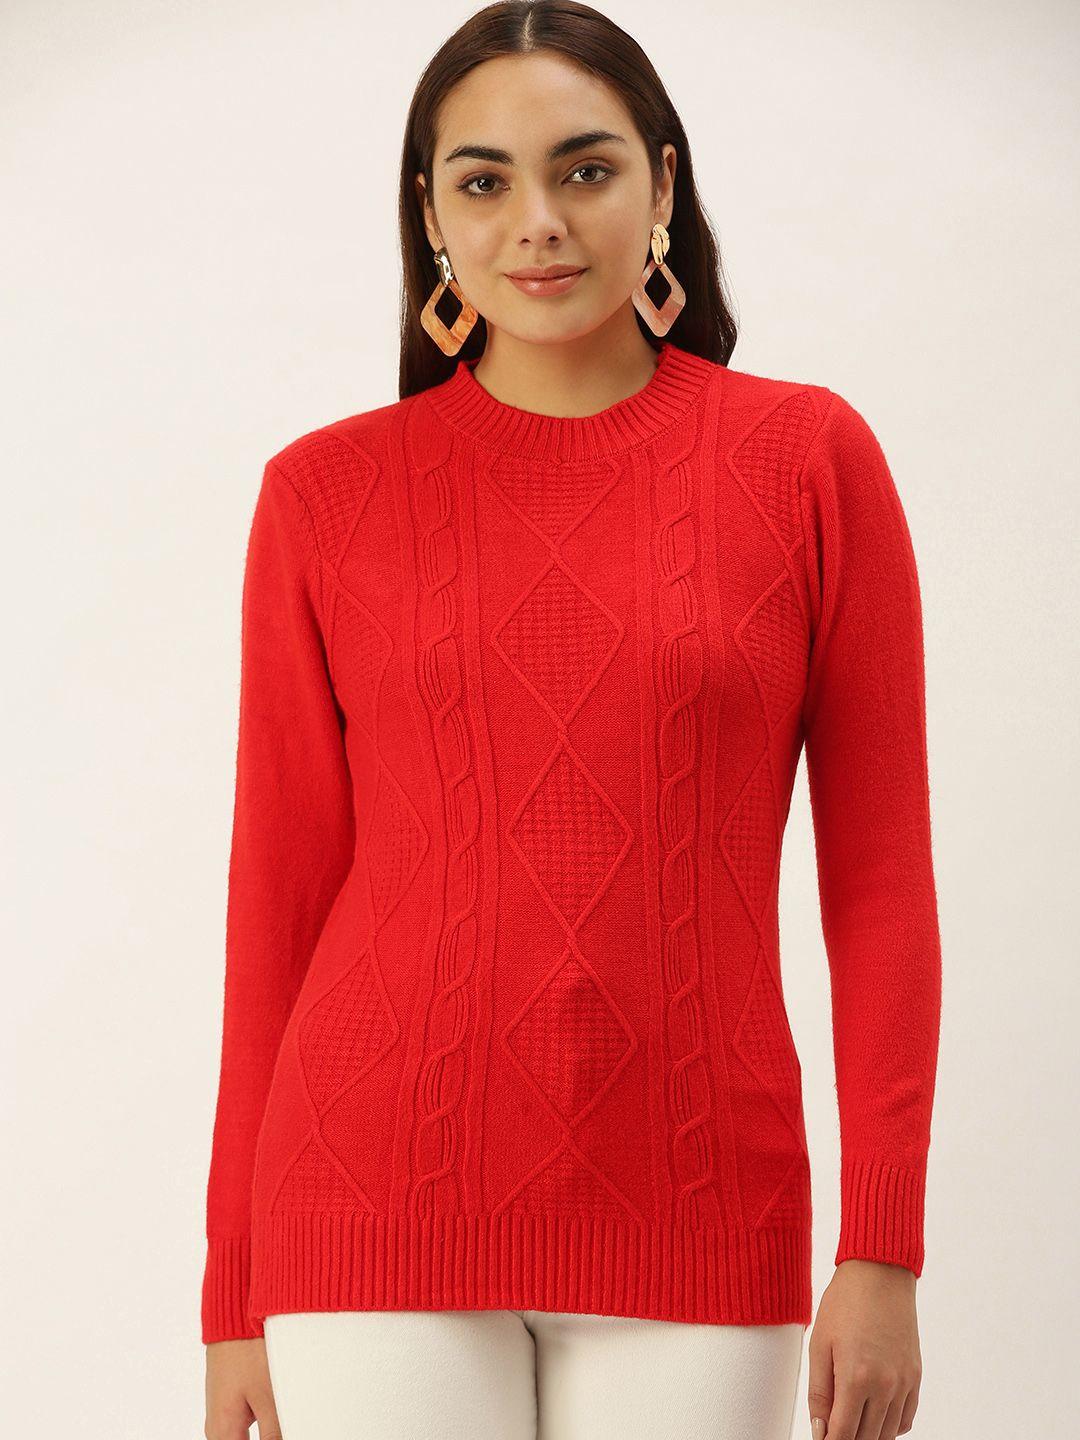 sheczzar women red cable knit pullover